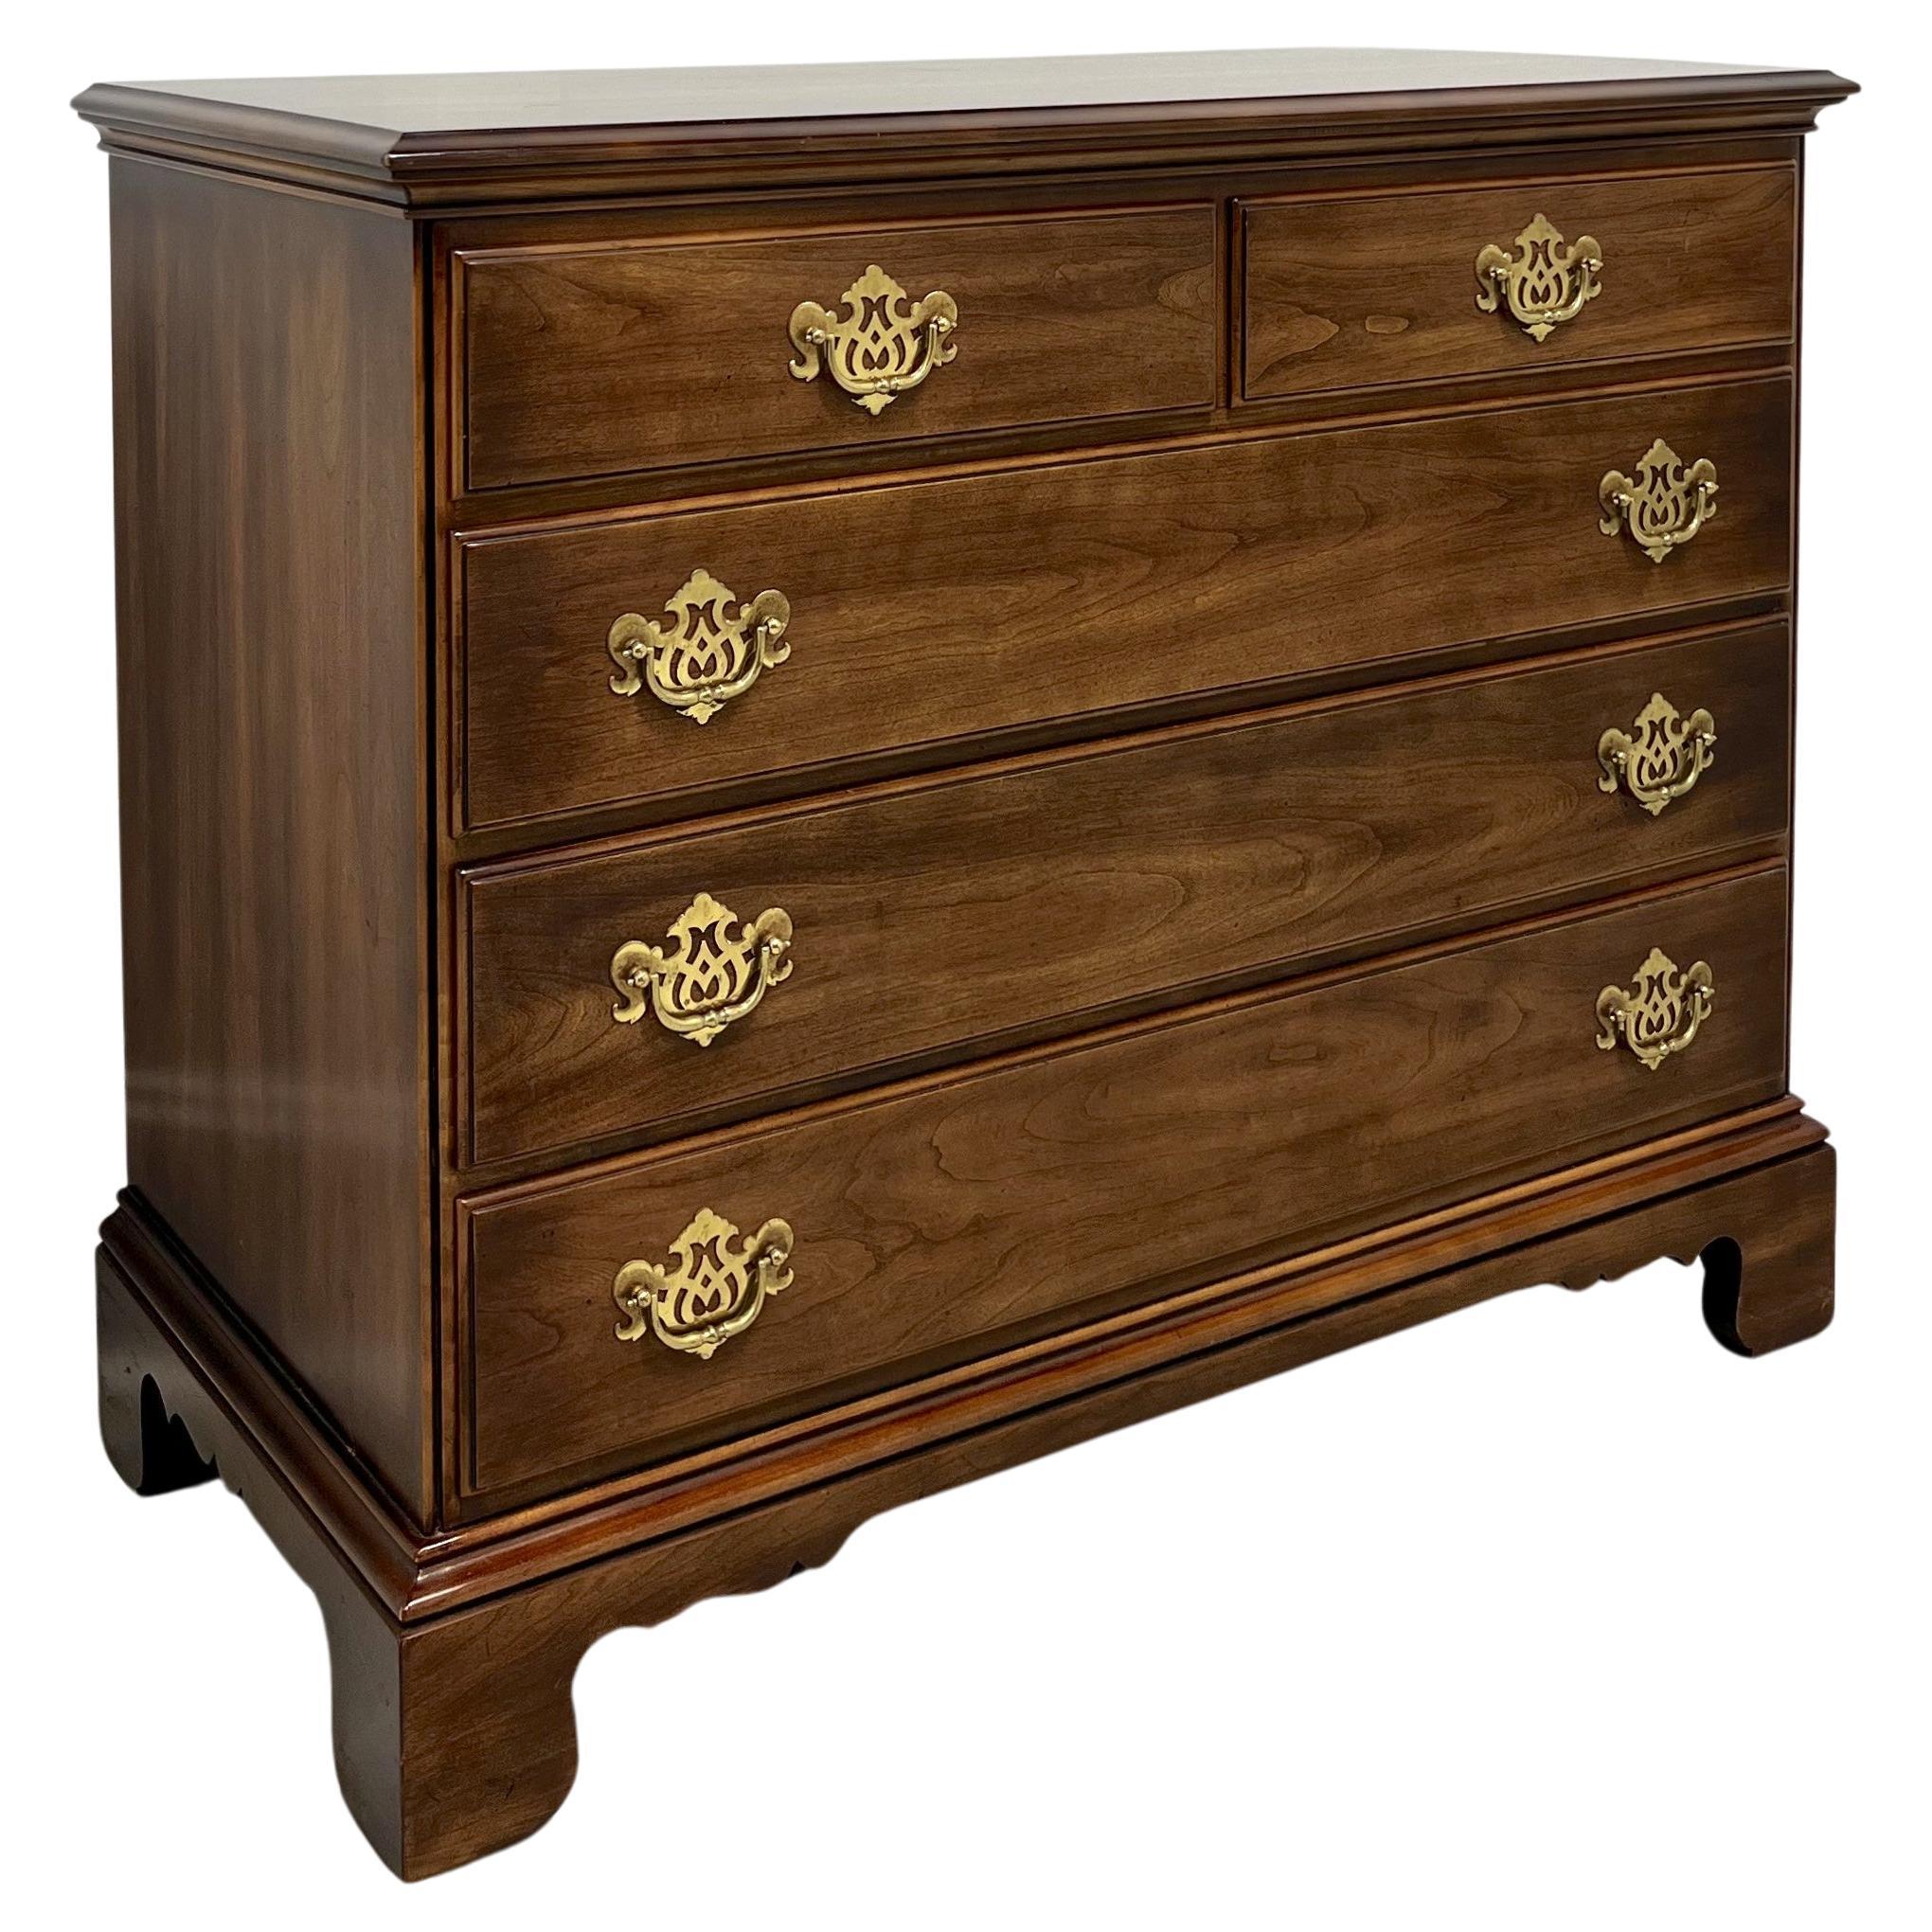 STATTON Trutype Americana Oxford Cherry Chippendale Bachelor Chest For Sale